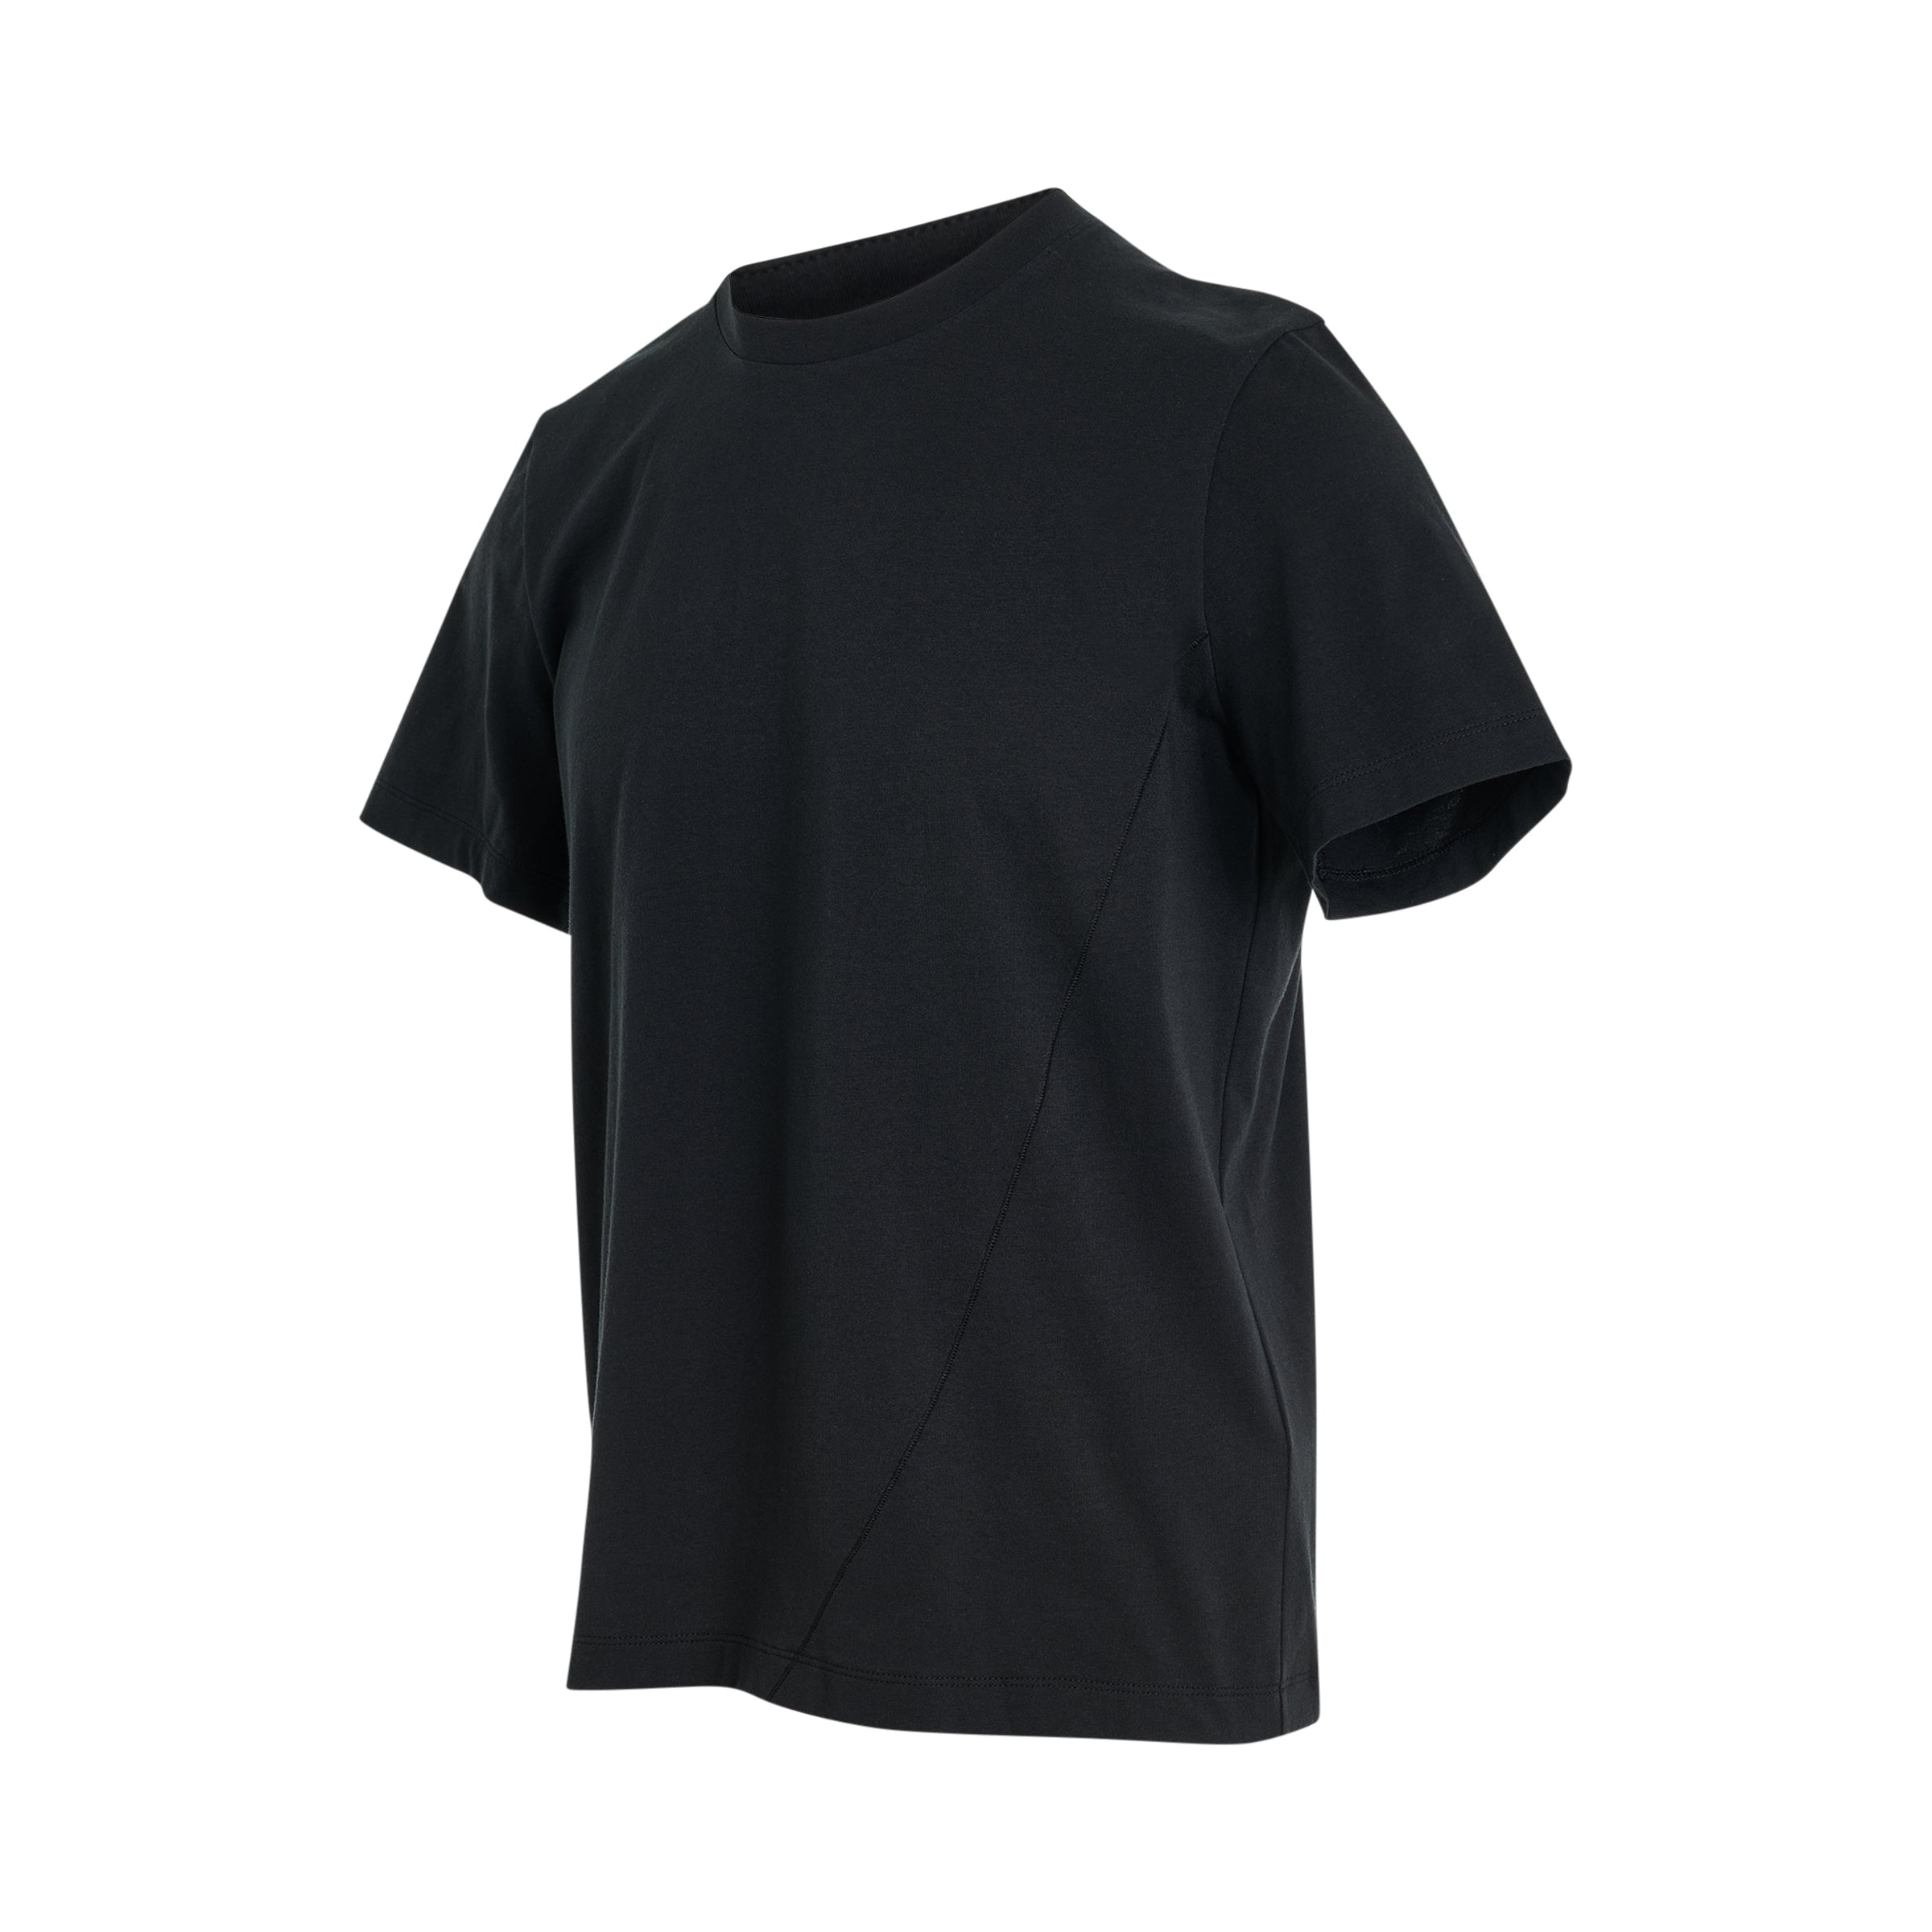 6.0 T-Shirt (Right) in Black - 2